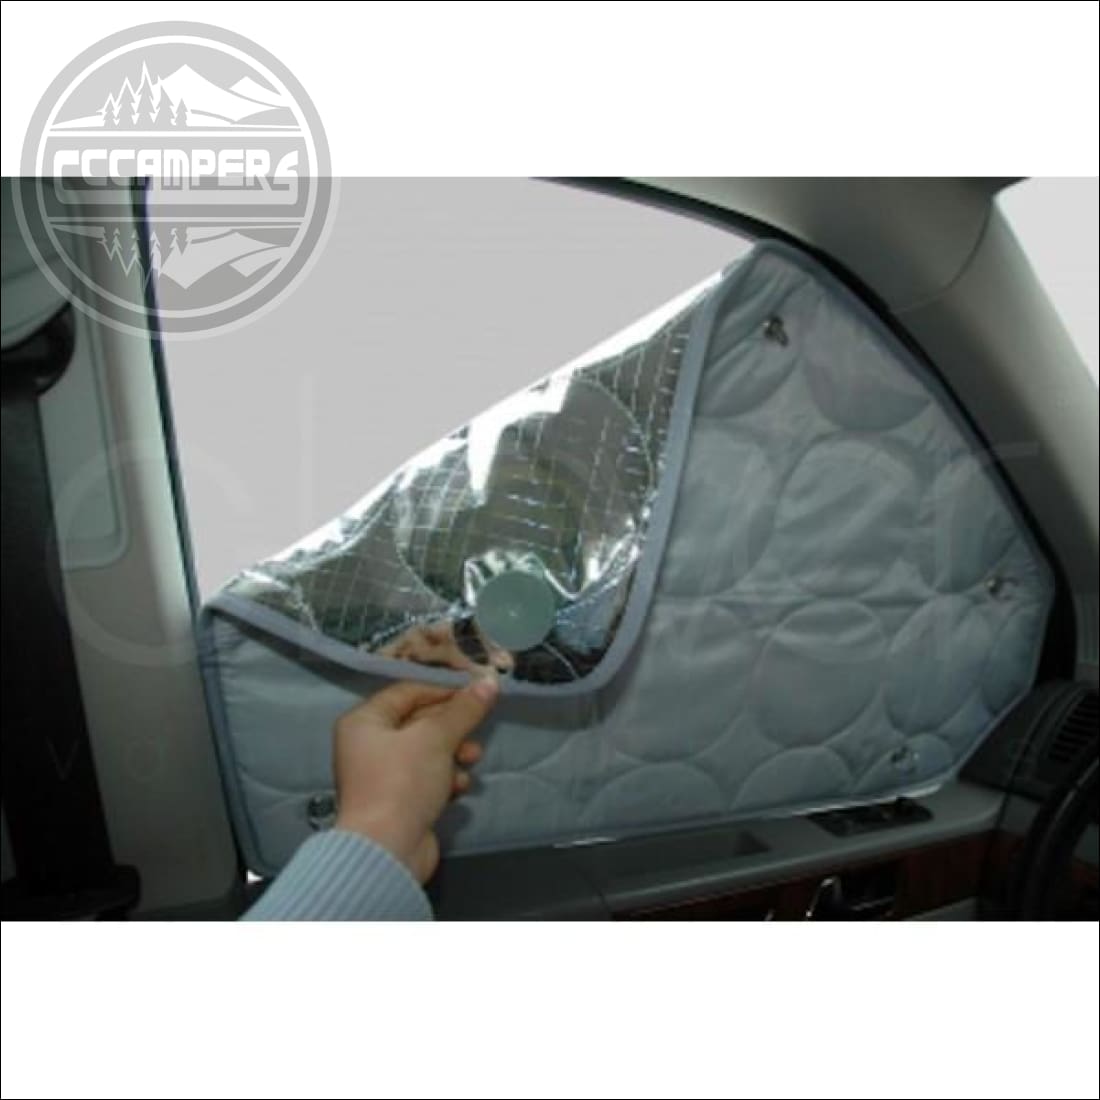 NV200 full Set Isoflex Thermo mats screens 12-piece for both tailgate and french barn door models - cccampers.myshopify.com